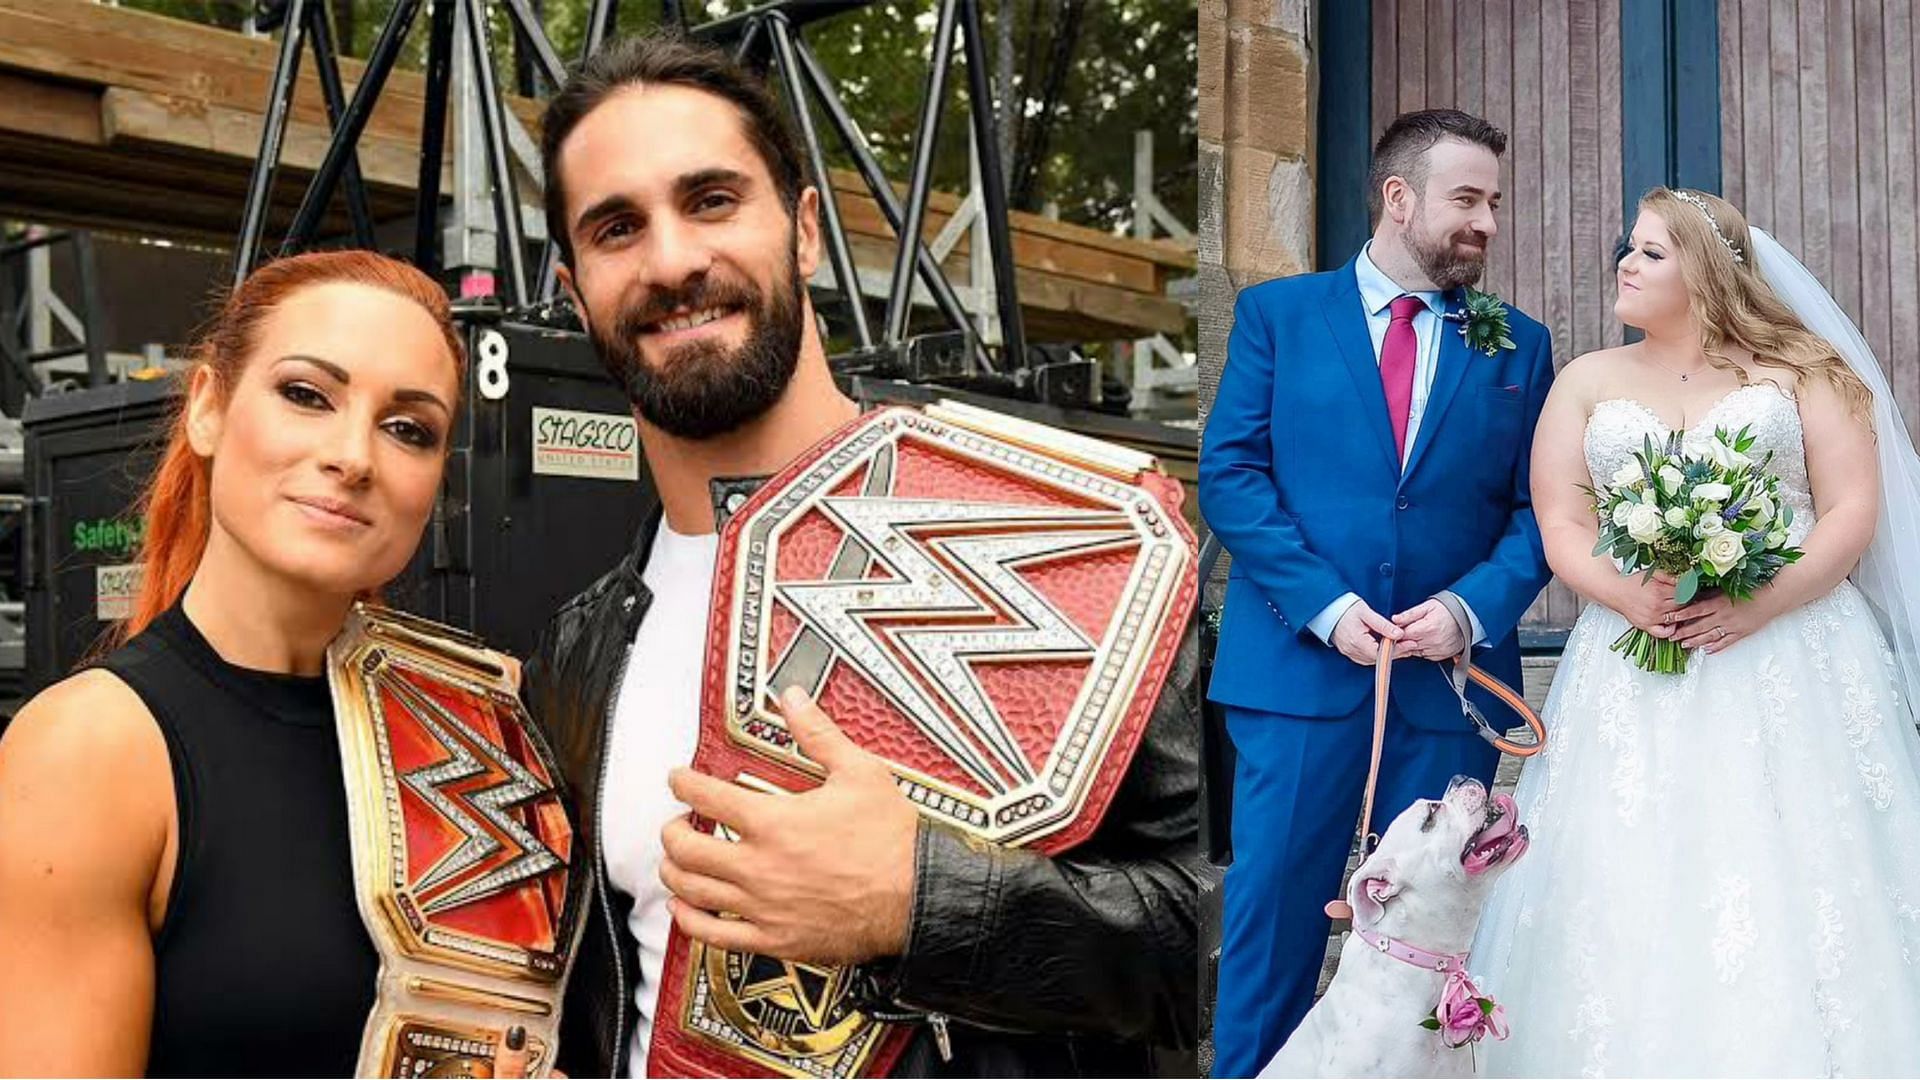 Several WWE Superstars got married post-pandemic.